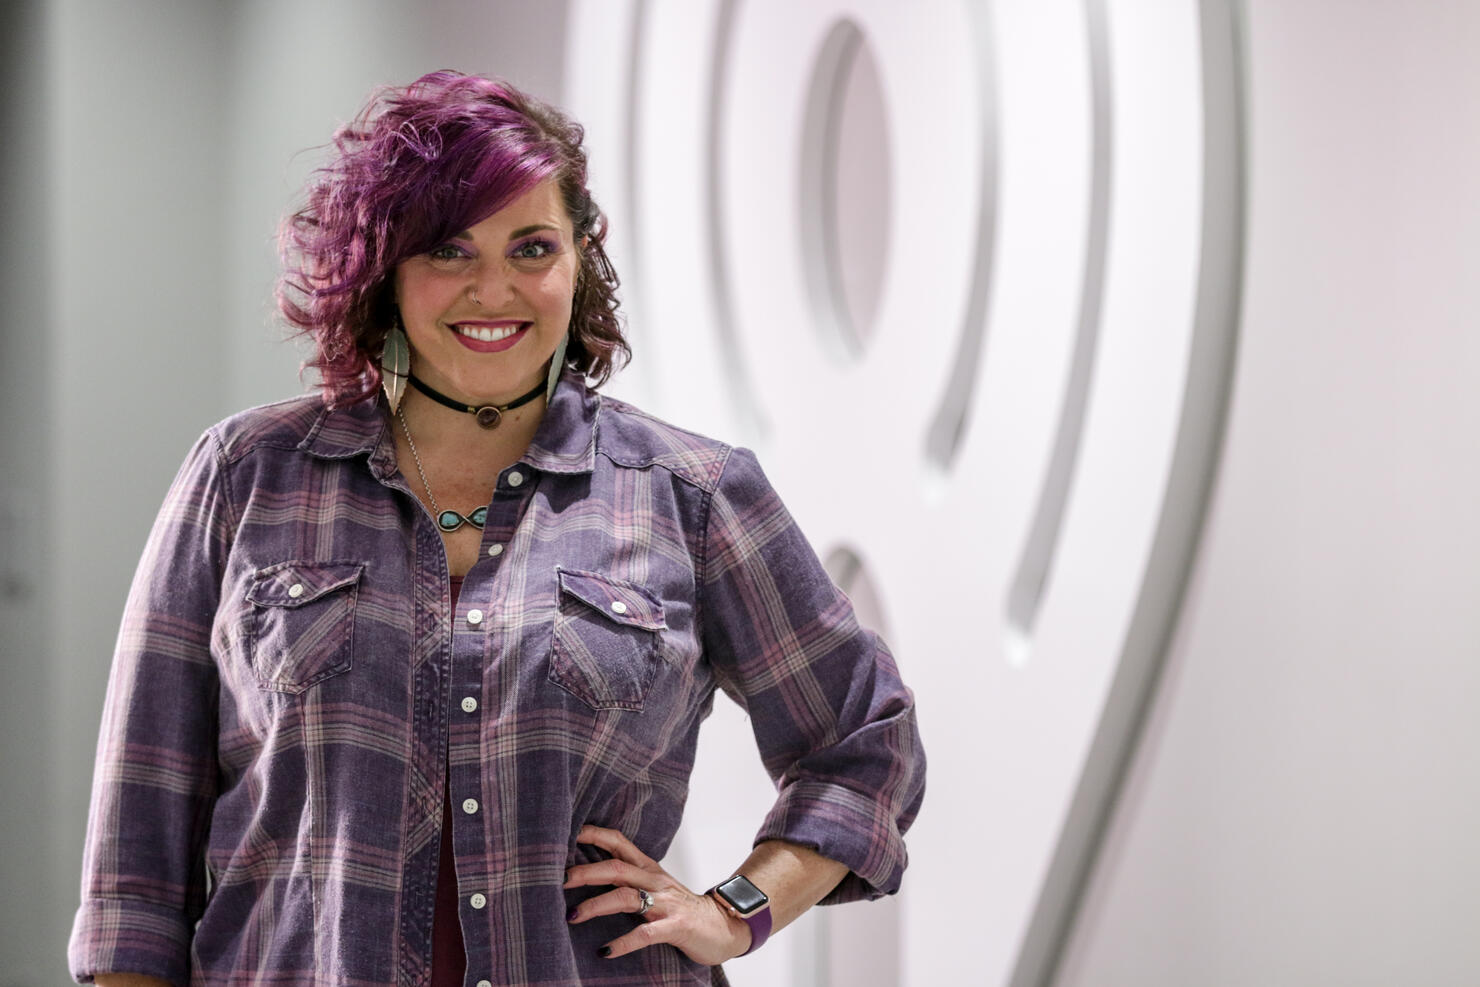 The Faces Behind The Voices: Meet The Powerful Women Of iHeartMedia Phoenix